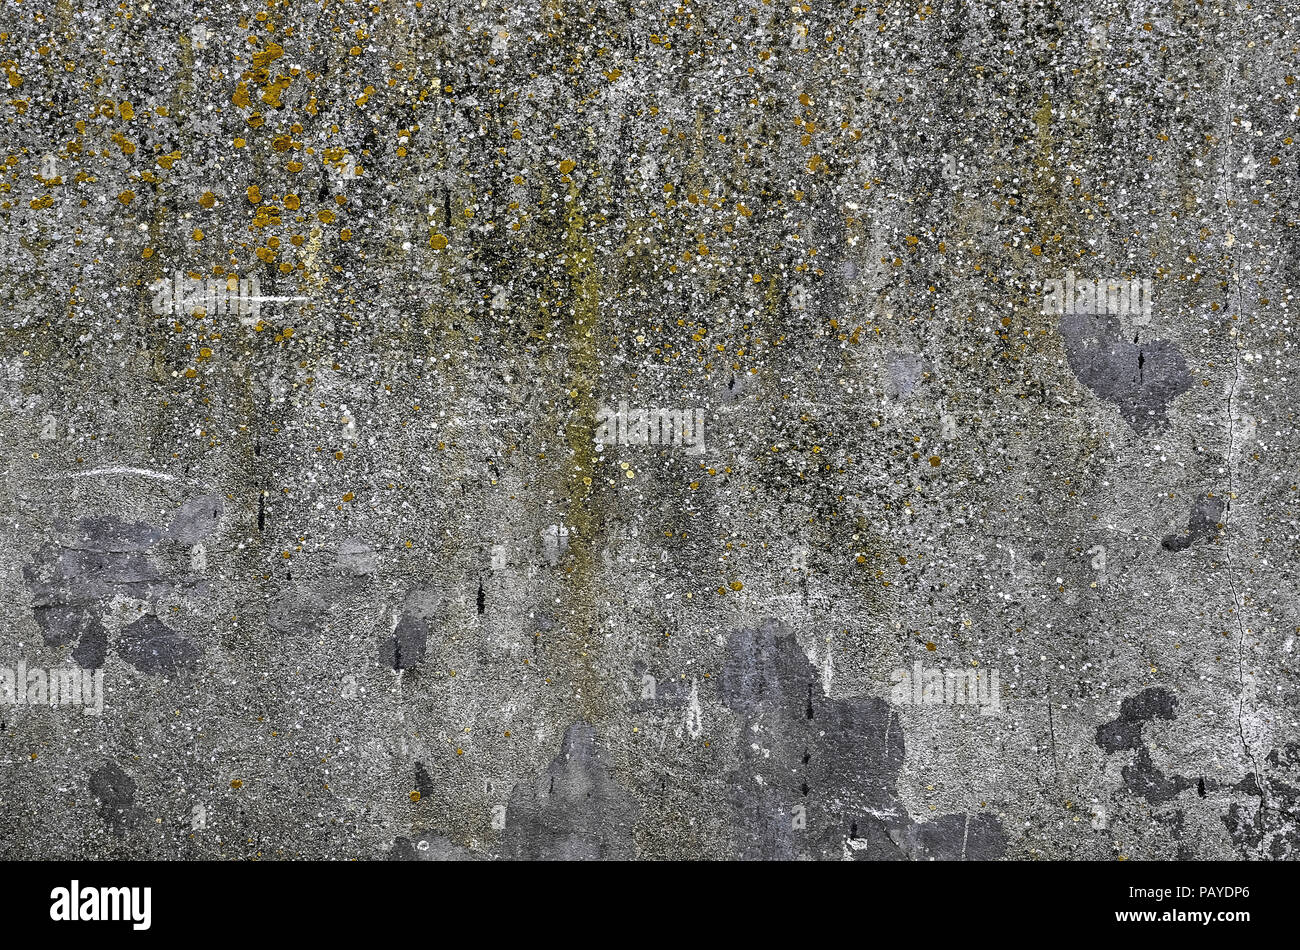 Old, weathered concrete surface with scratches and a multitude of dots and stains of dirt, lichen and other irregularities Stock Photo